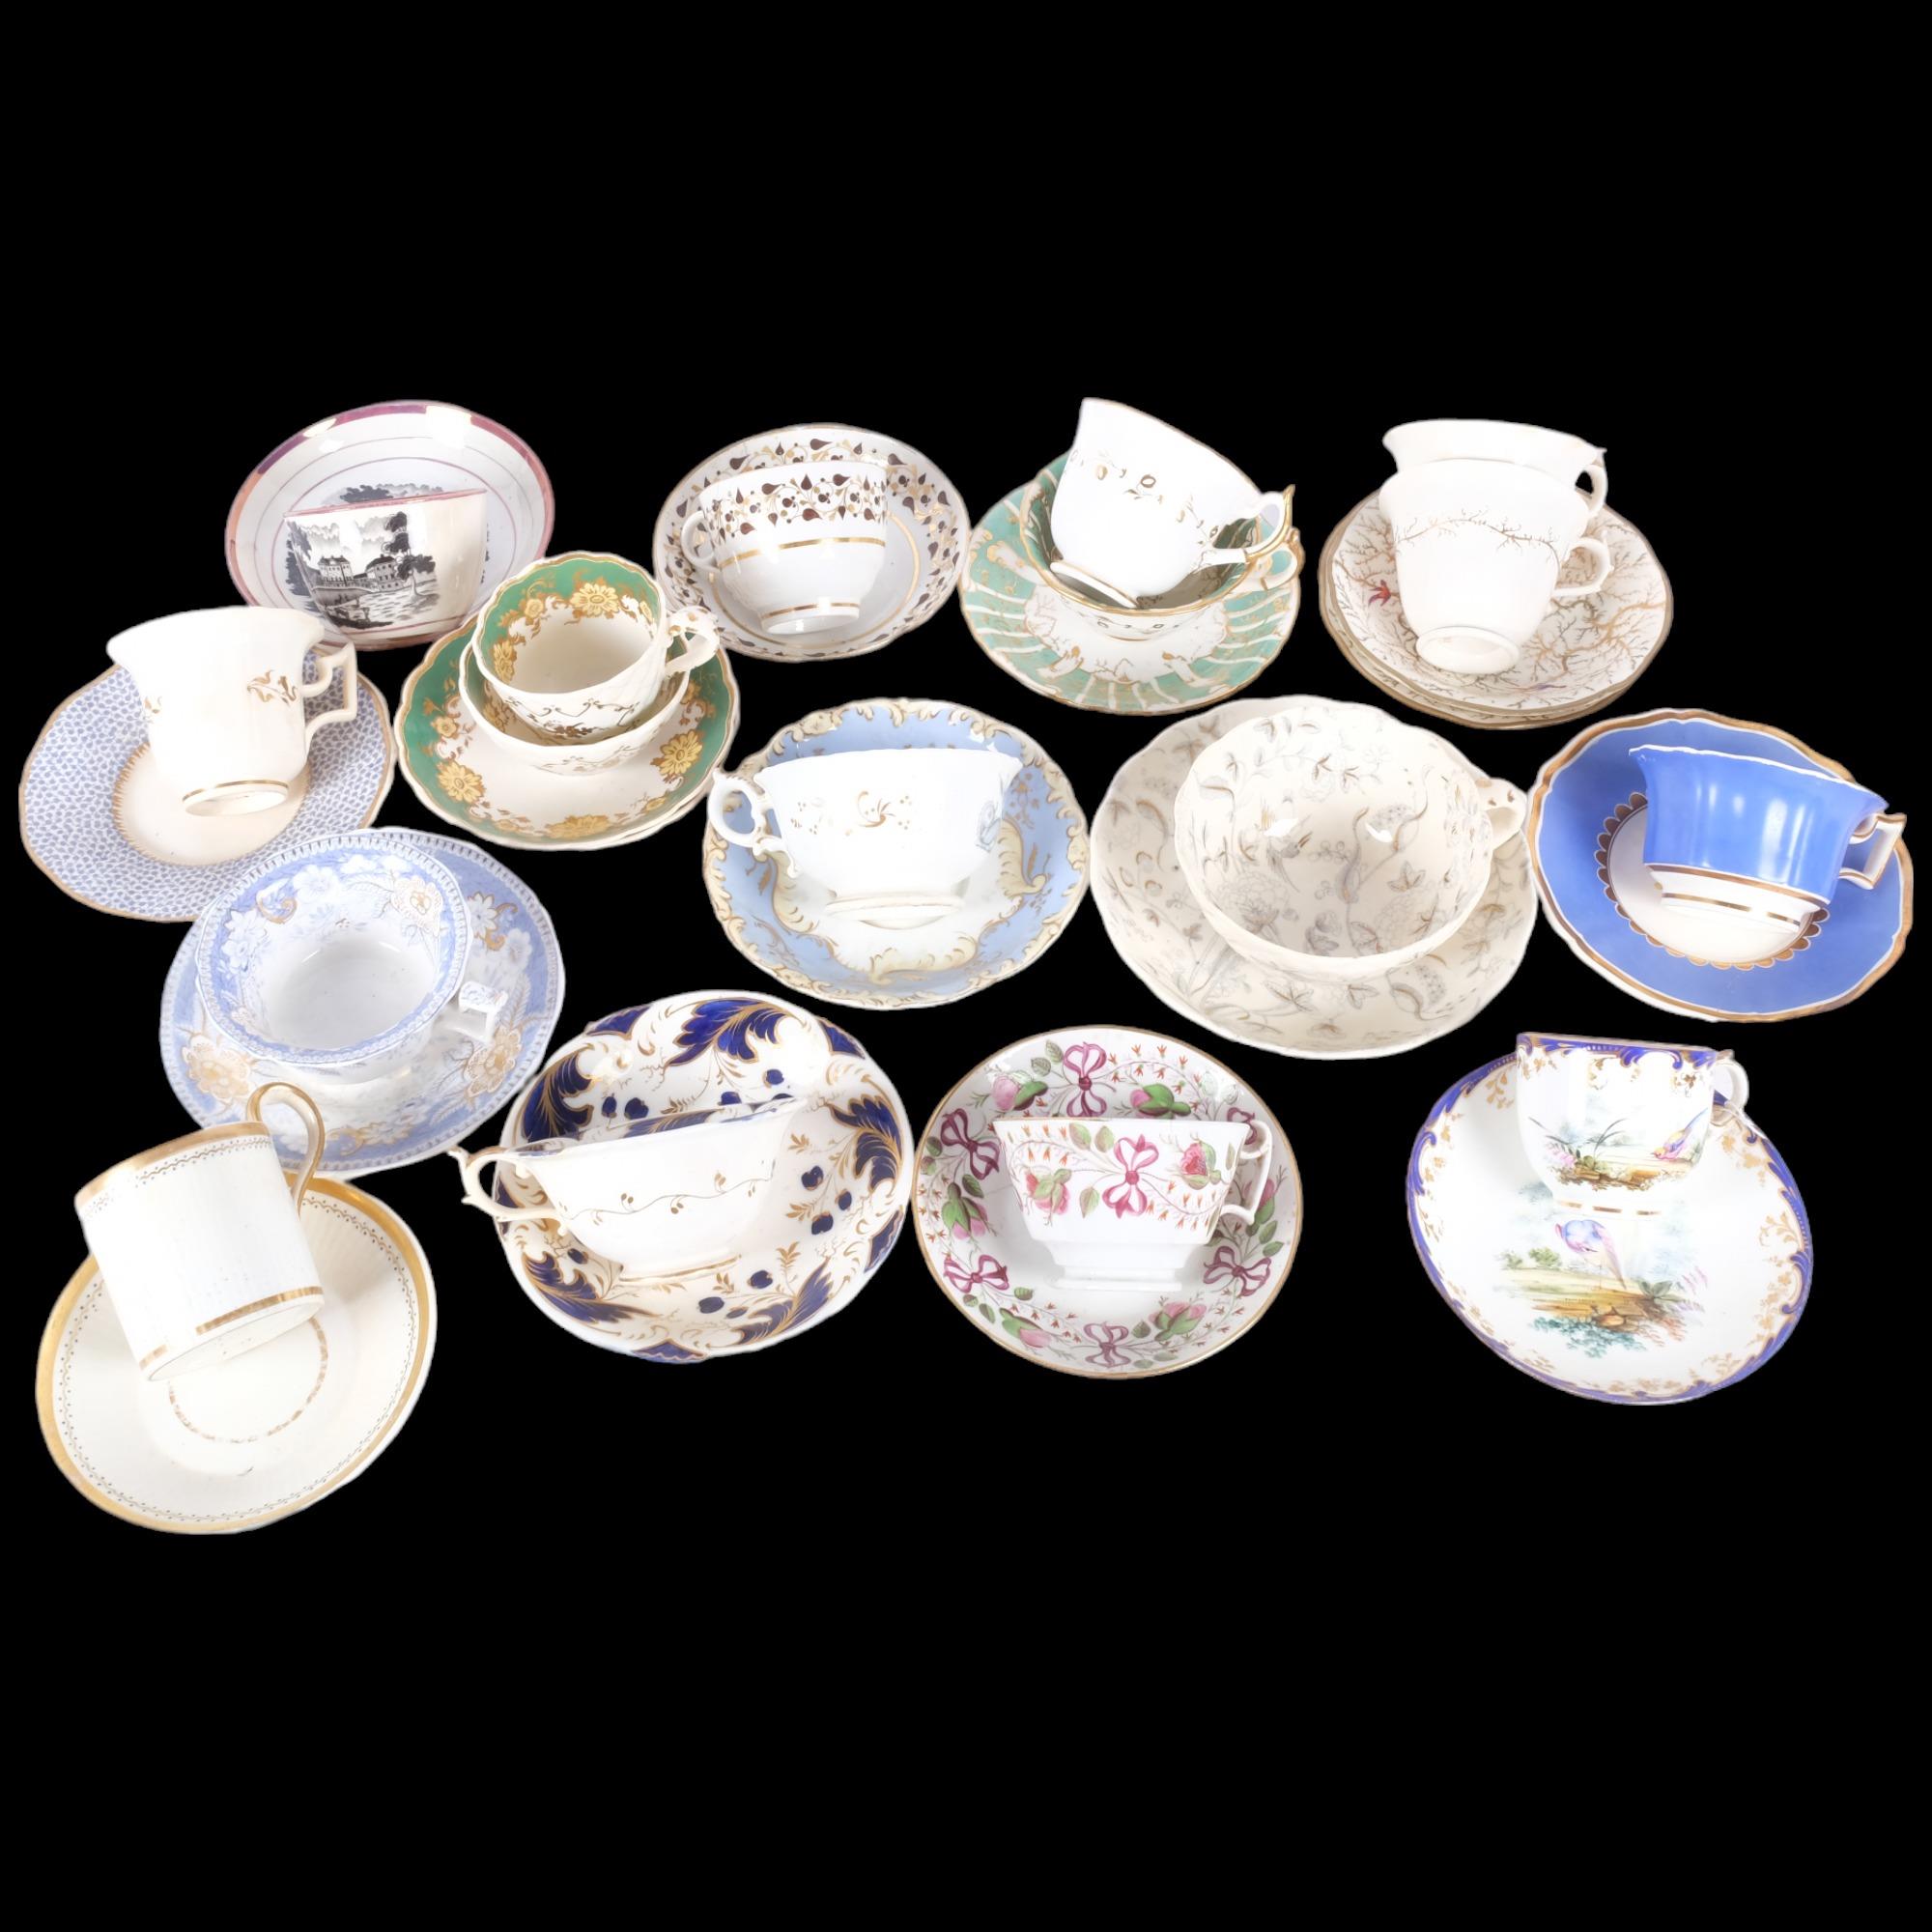 A quantity of early 19th century and later cabinet cups and saucers including Rockingham, Sunderland